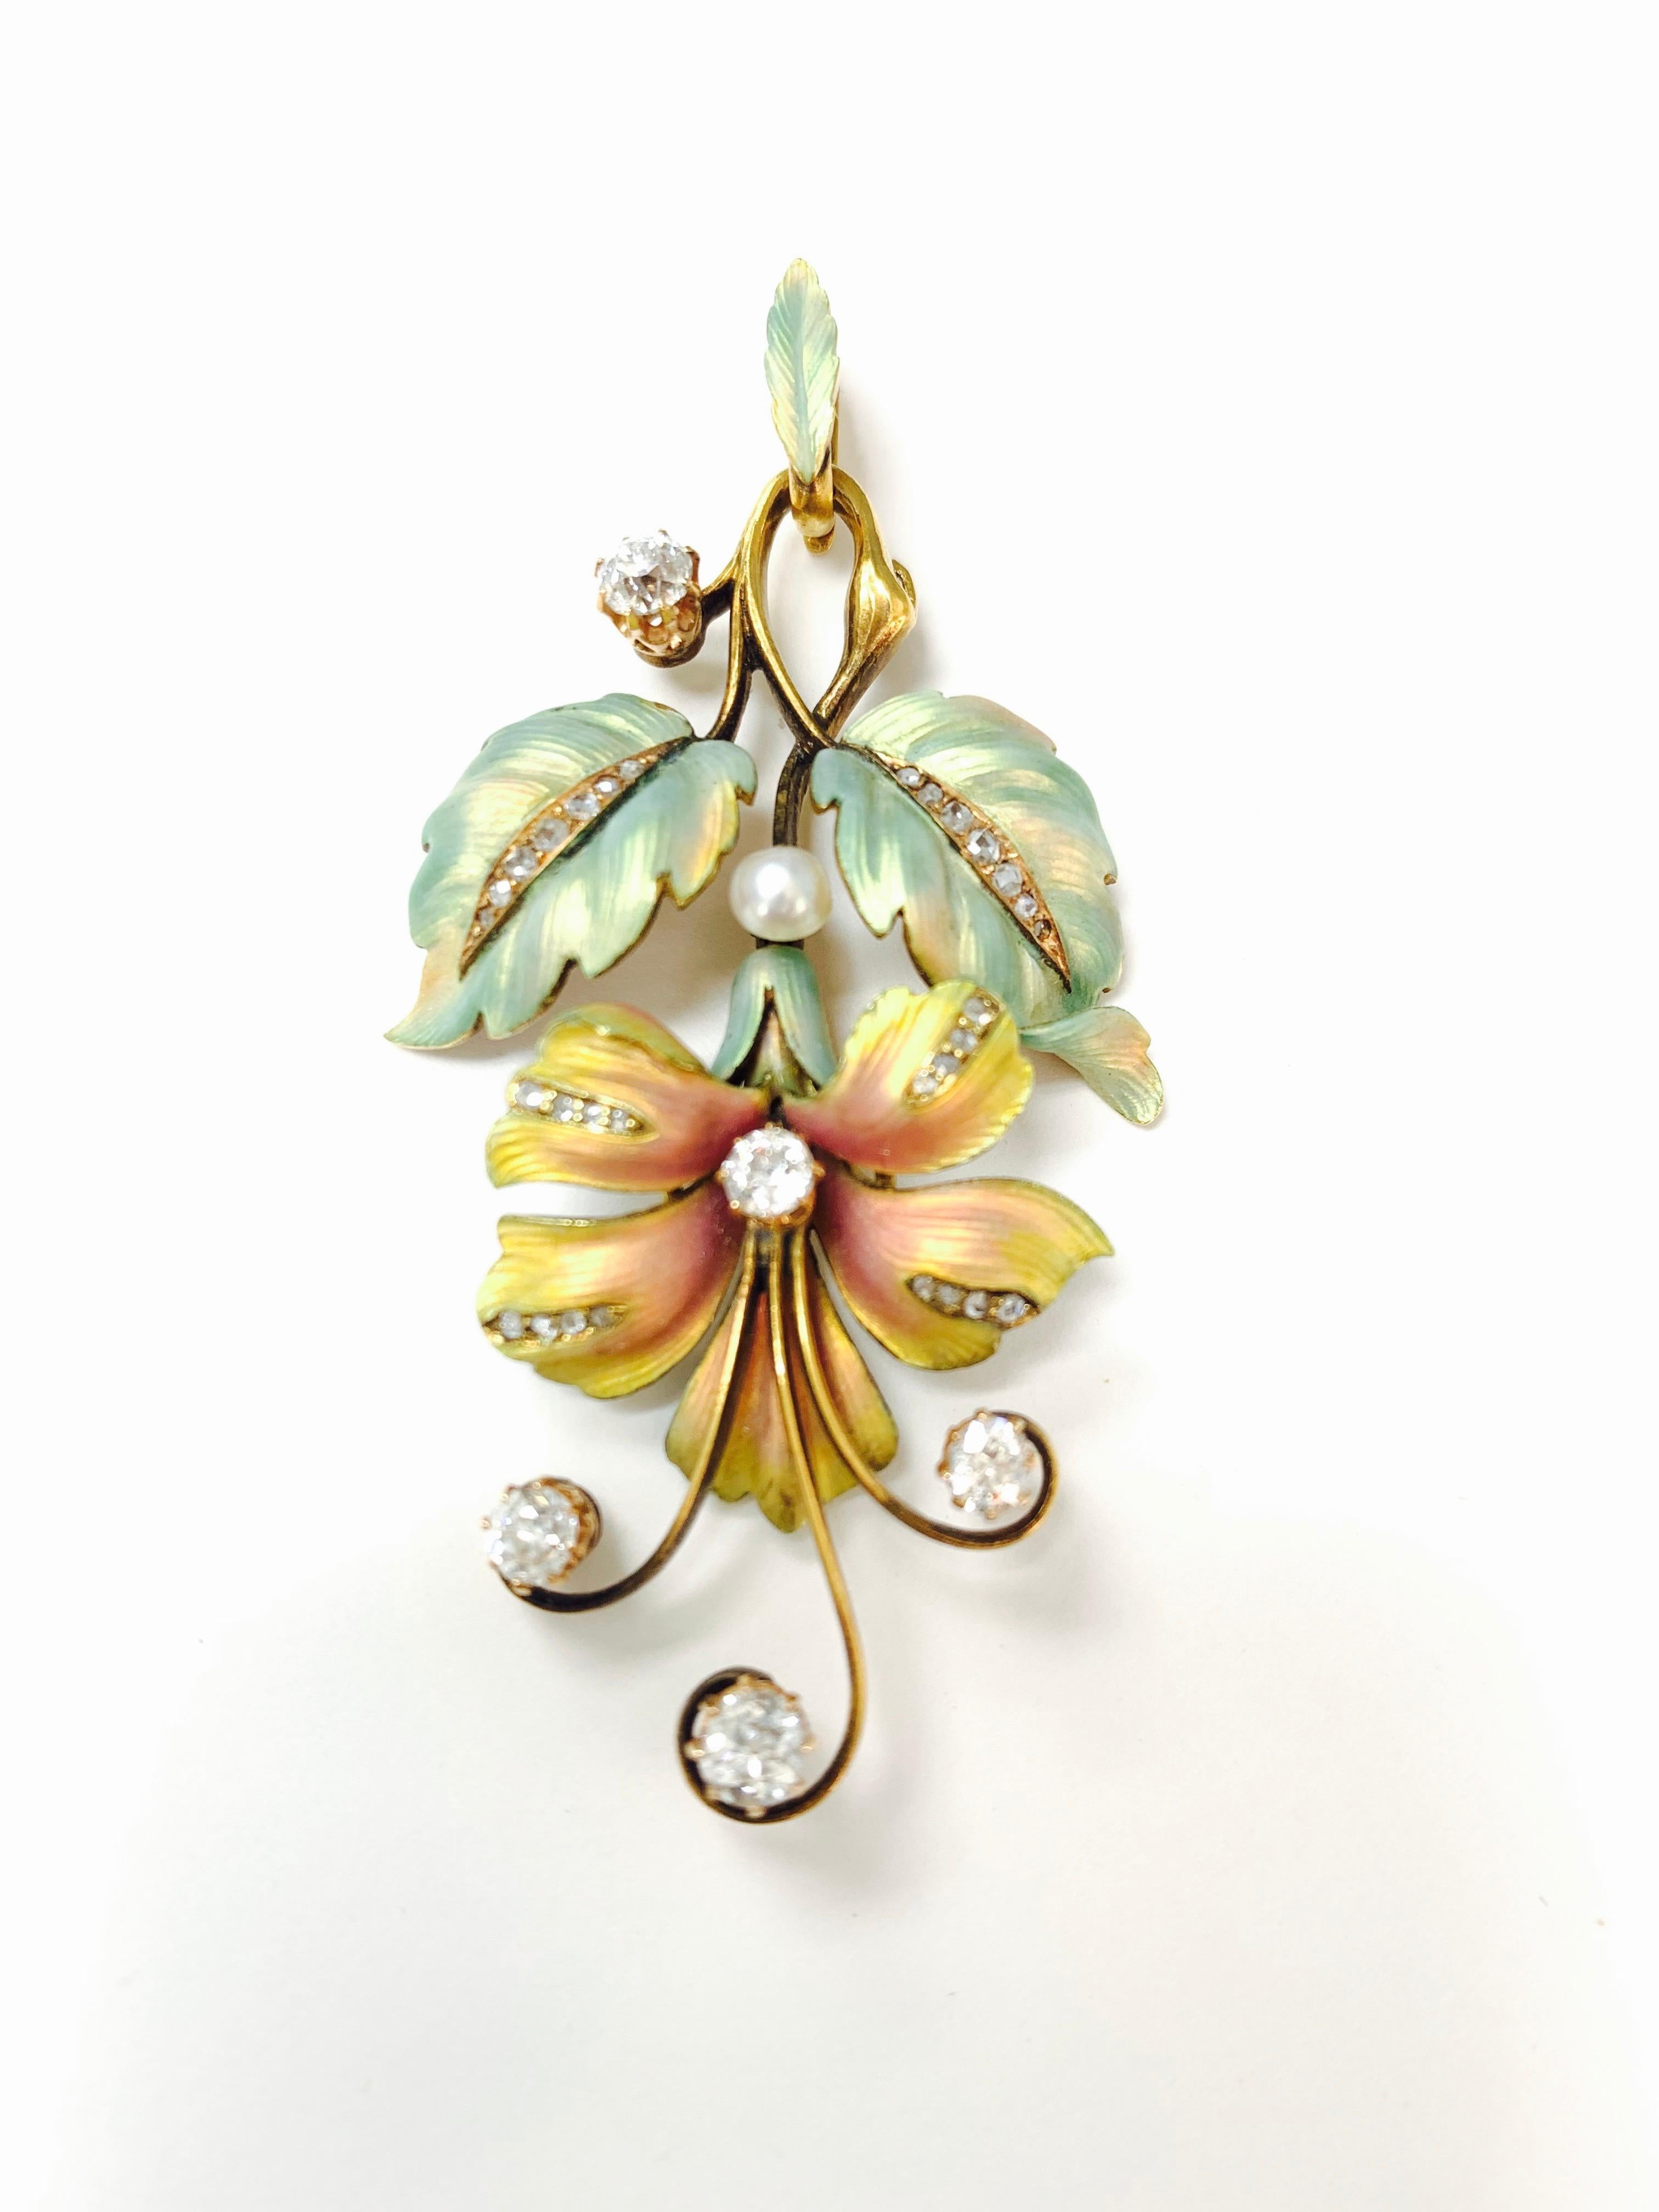 One of a kind Antique 1880 Art Nouveau Diamond , Pearl and enamel broach handcrafted in yellow gold. 
The details are as follows : 
Diamond weight : 1 carat approx 
Measurement : 2.75 inch long 
Metal : 18K 








